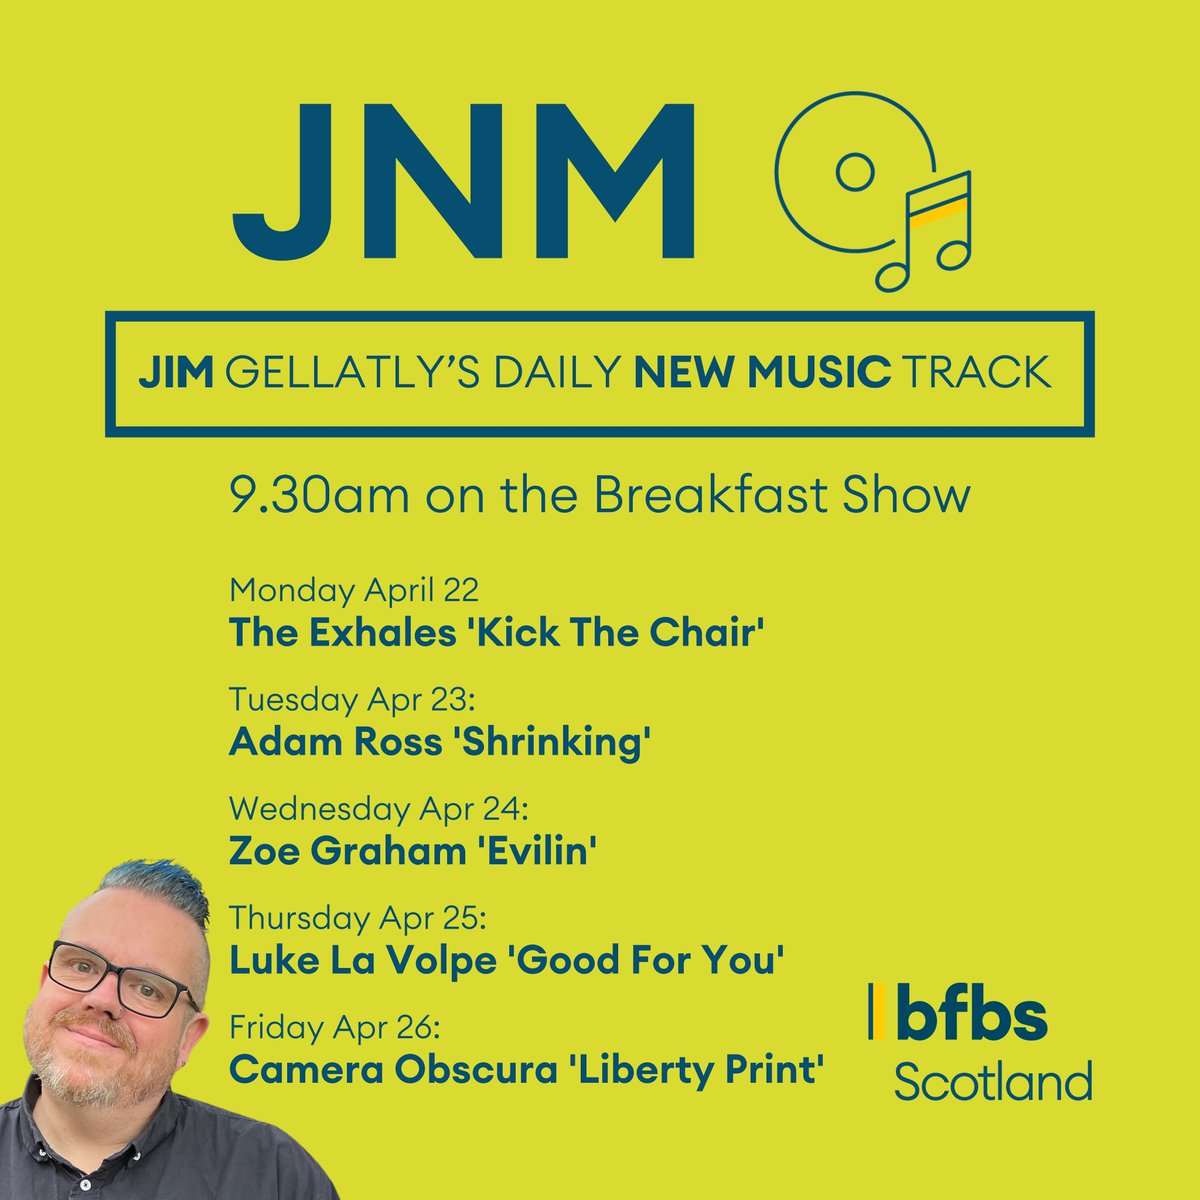 Jim's got more new music from Scotland to share with you on the Breakfast Show! 🏴󠁧󠁢󠁳󠁣󠁴󠁿 📻 bfbs.com/scotland